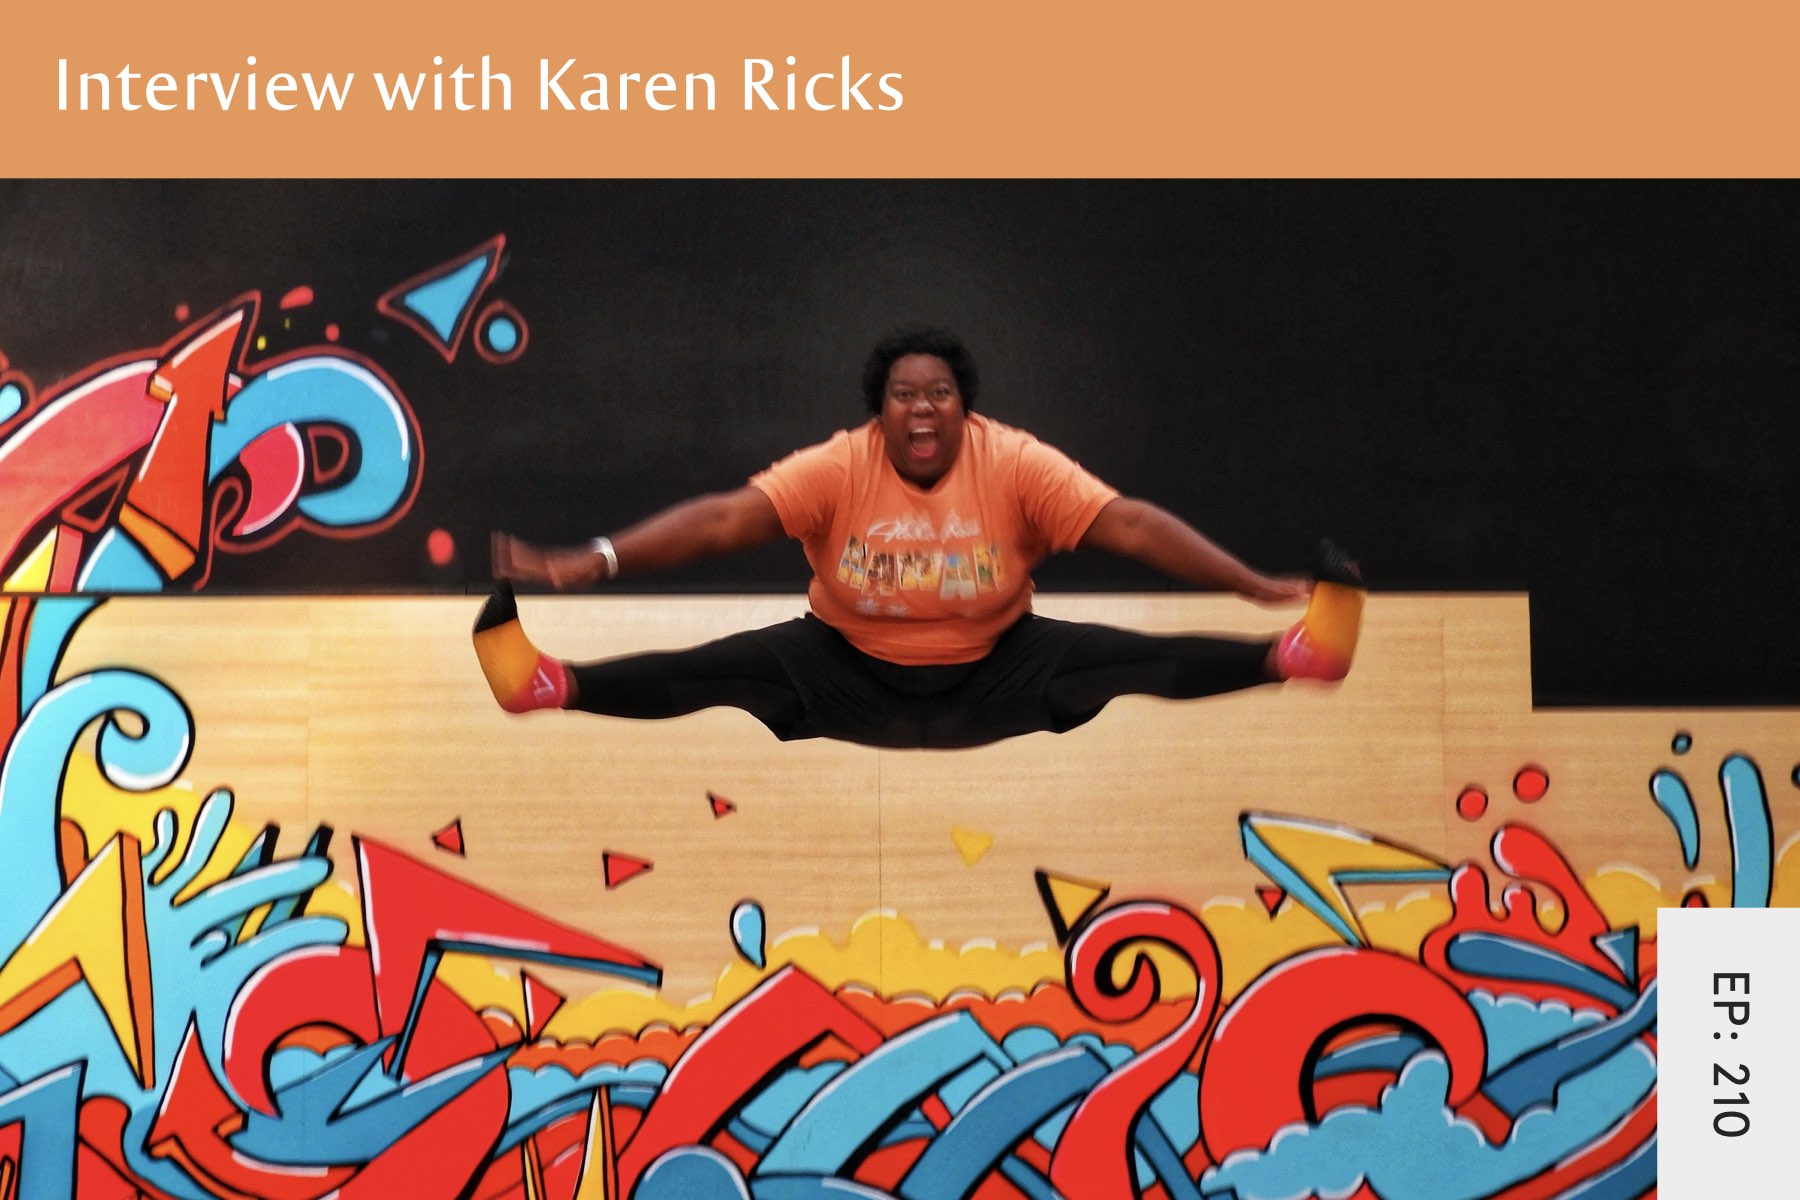 210: Interview with Karen Ricks - Seven Health: Eating Disorder Recovery and Anti Diet Nutritionist